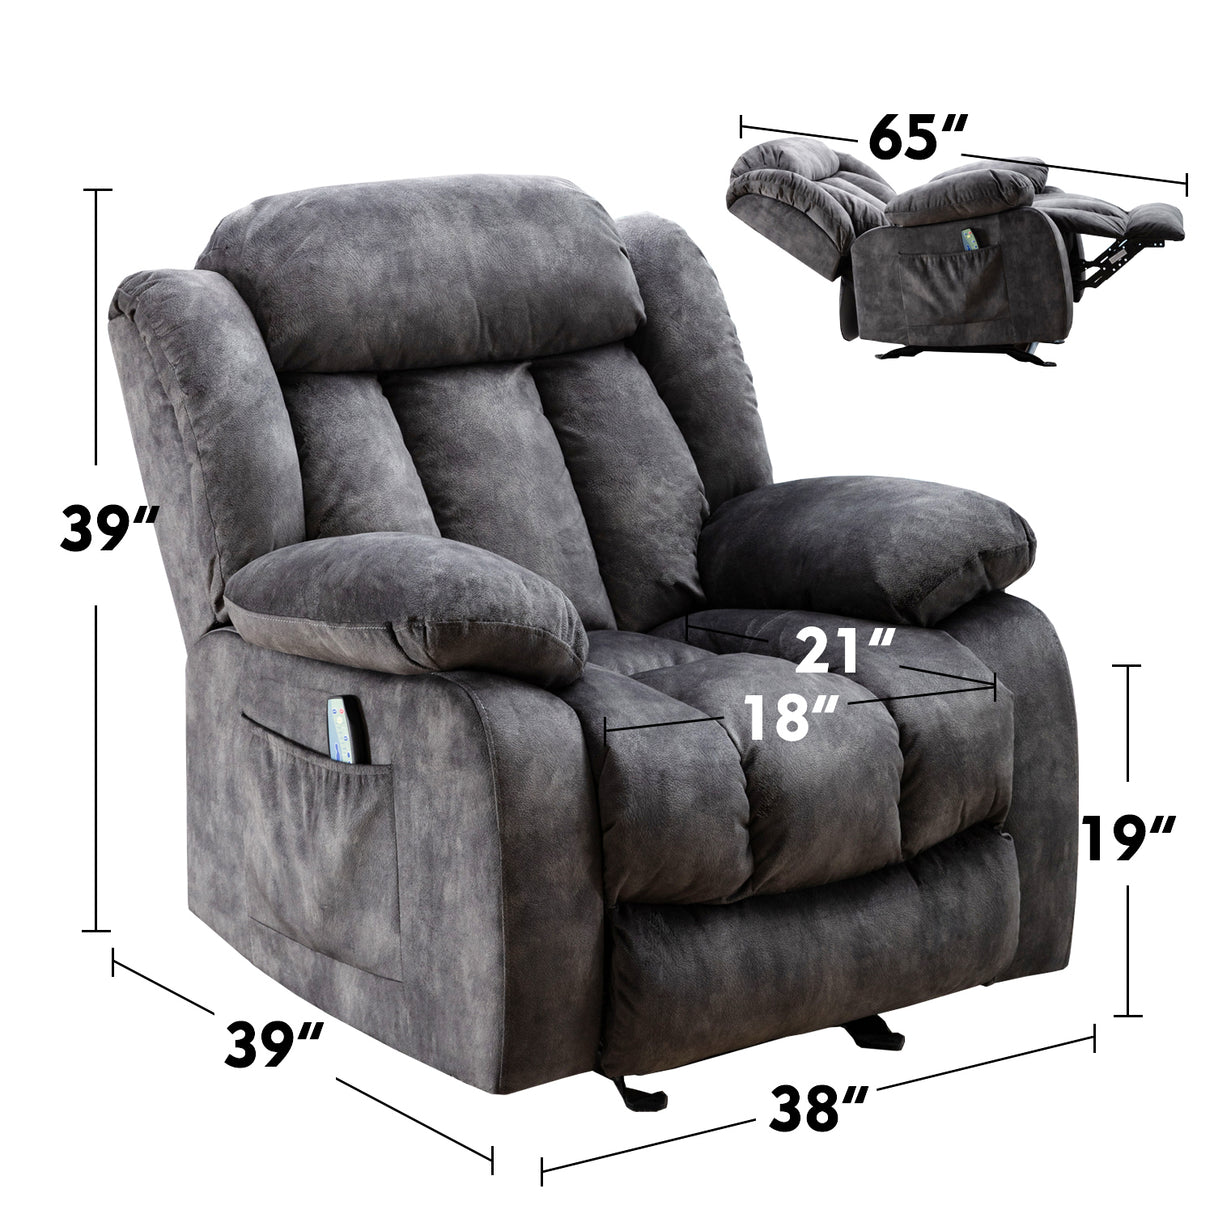 Massage Rocker Recliner with Heat and Vibration, Manual Rocking Recliner Chair with Vibrating Massage, Comfy Padded Overstuffed Recliner Soft Fabric Heated Recliner (Grey) Home Elegance USA